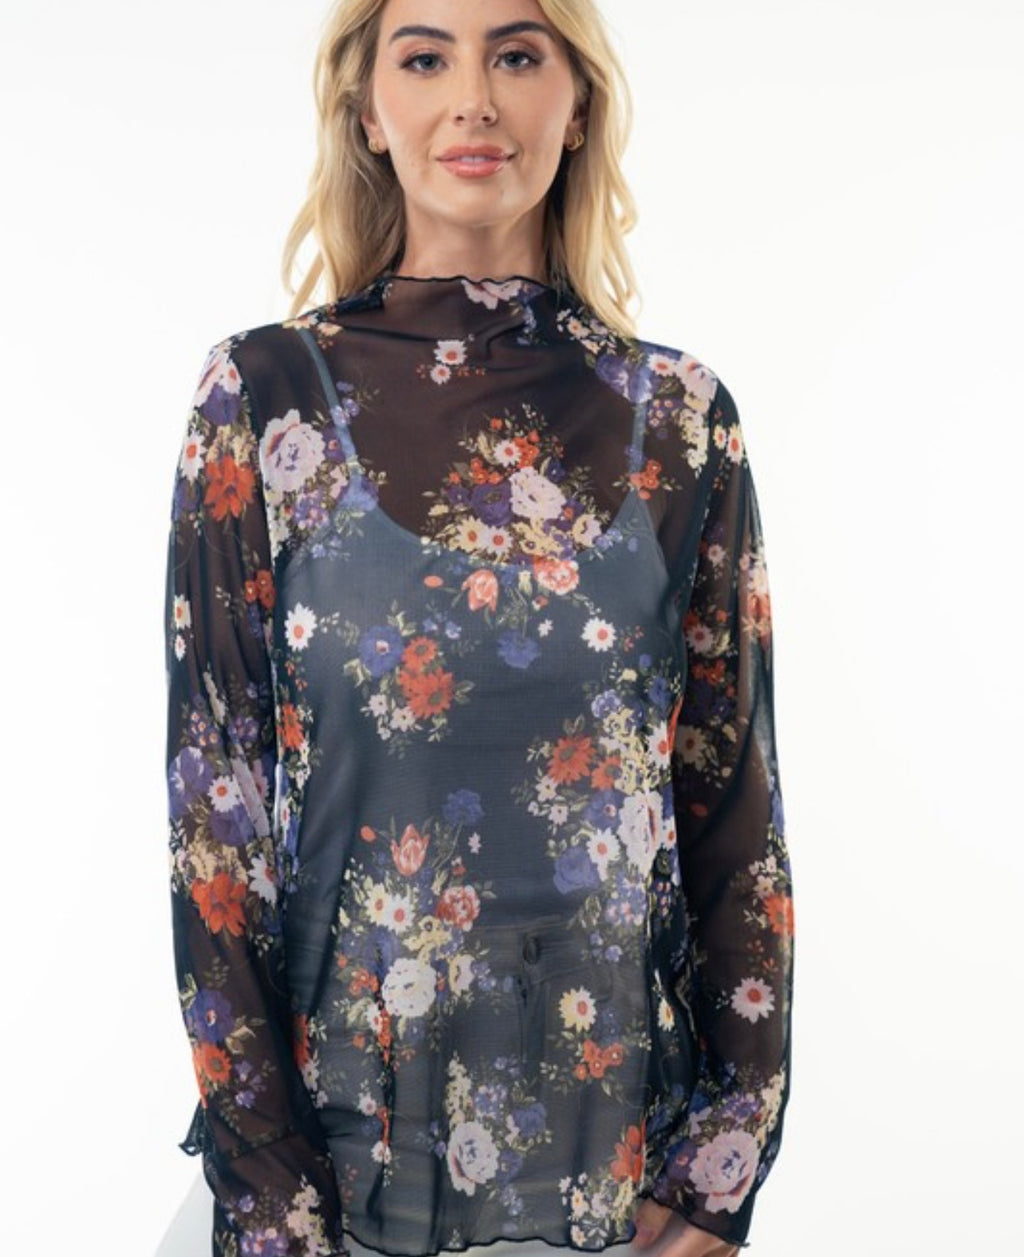 Just Watch Floral Knit Top